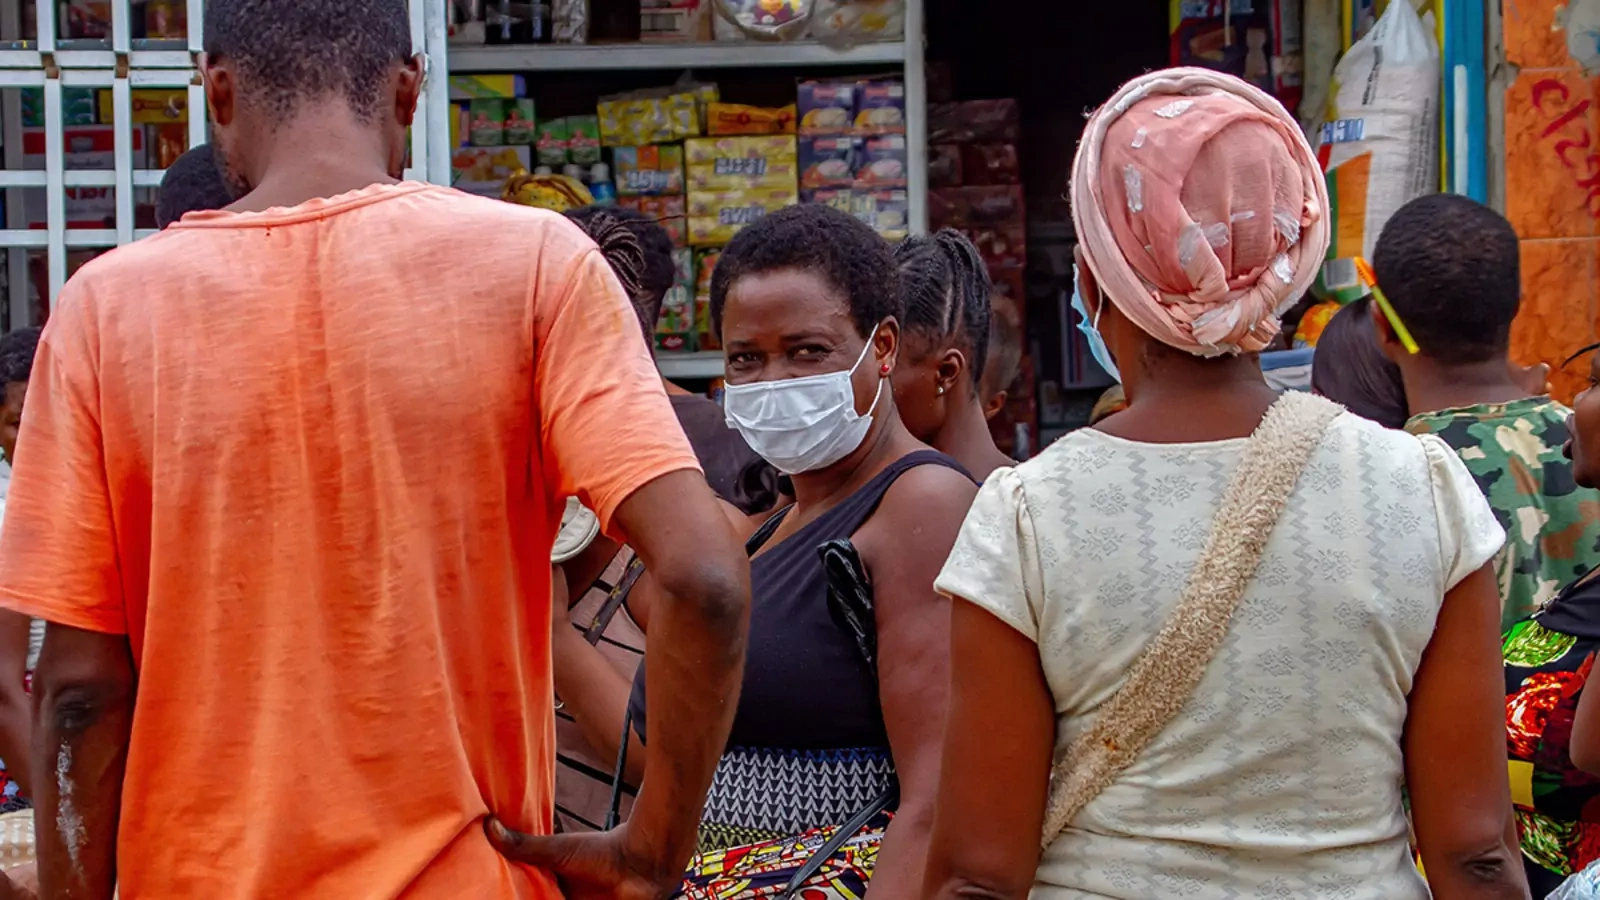 A food vendor wears a mask in Luanda, Angola, where severe restrictions have been implemented to help stop the spread of COVID-19.